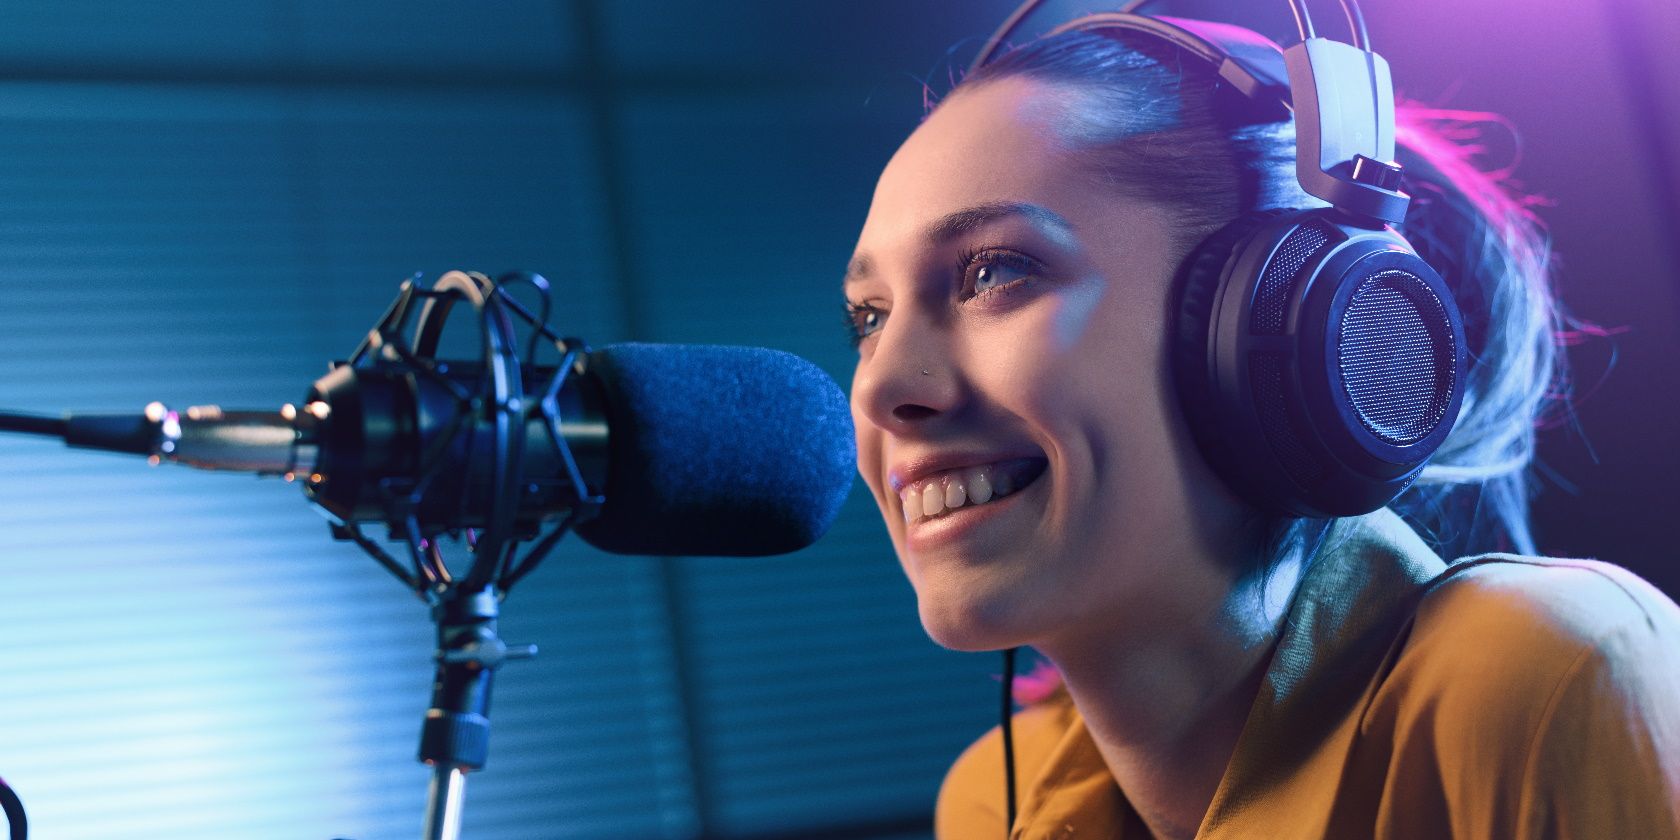 Young smiling woman wearing headphones and speaking into a microphone at the radio station, entertainment and communication concept